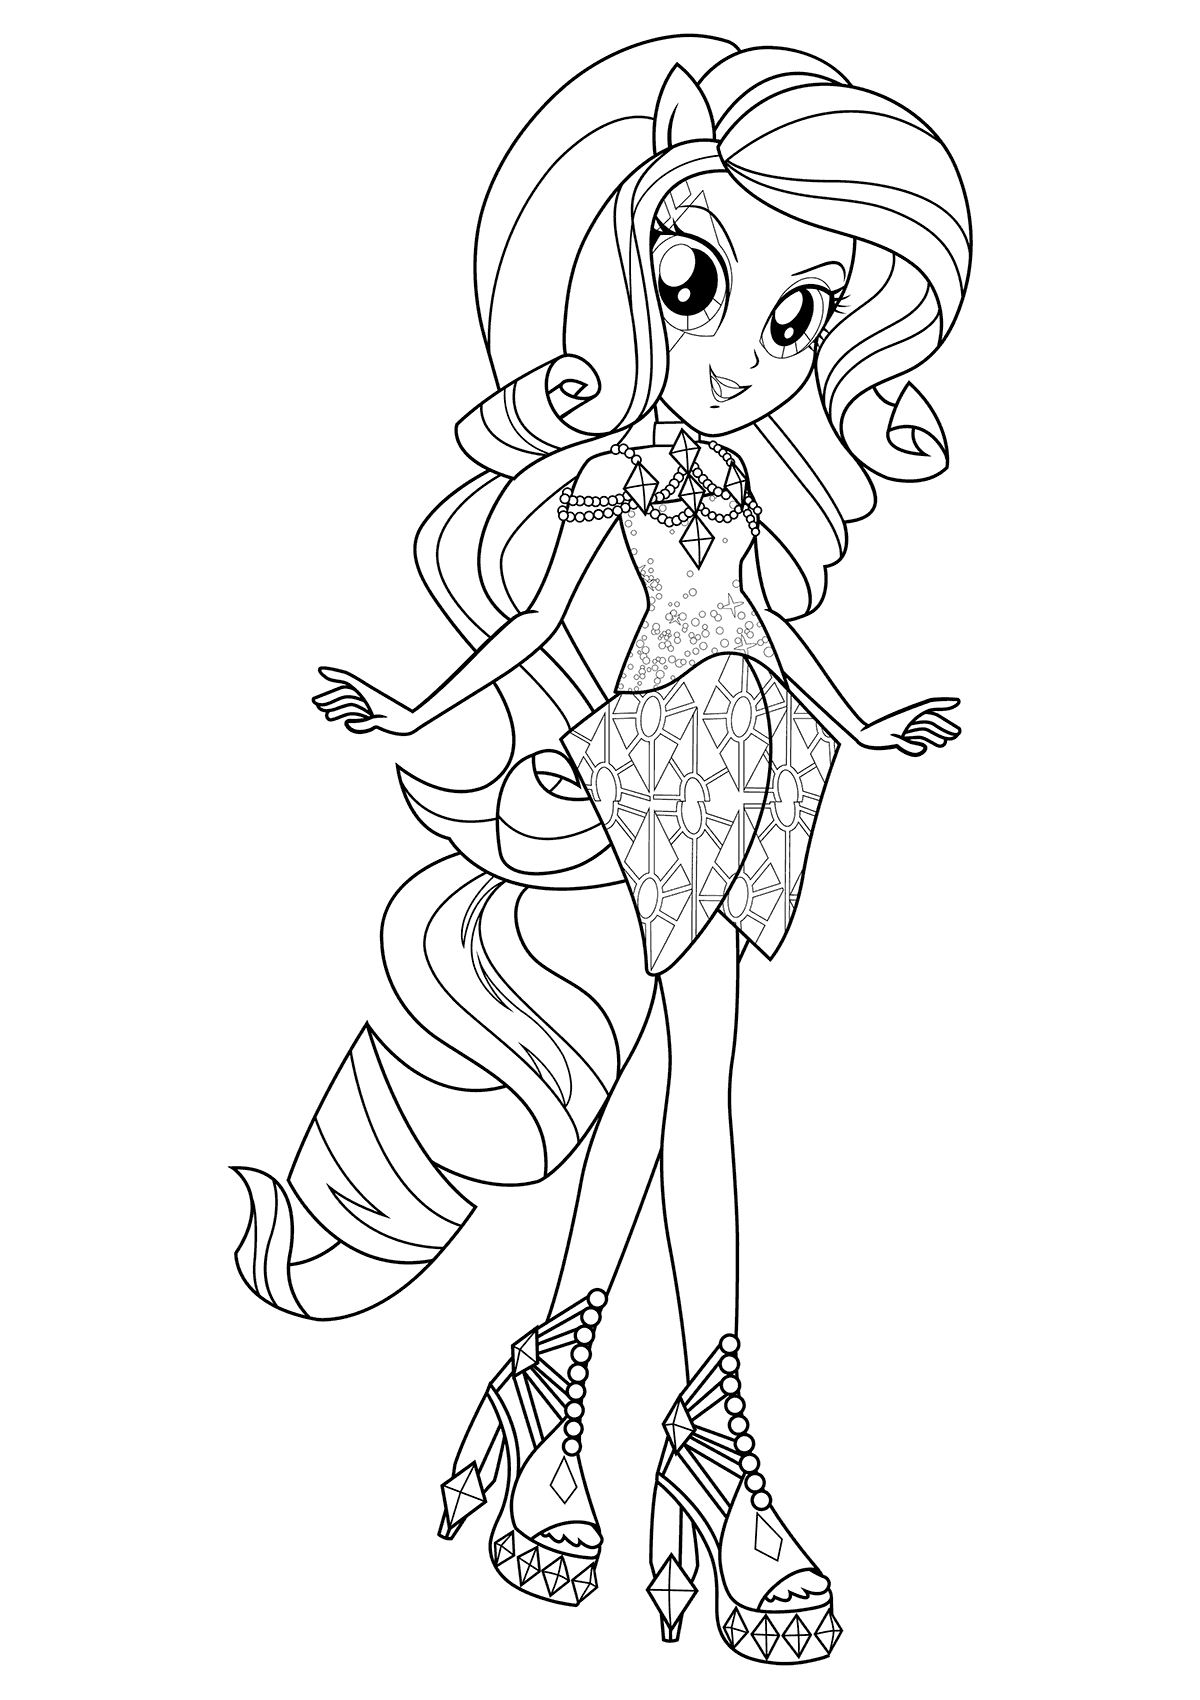 Mlp Coloring Pages Rarity Coloring Pages Equestria Girl Coloring Pages Download Free Books